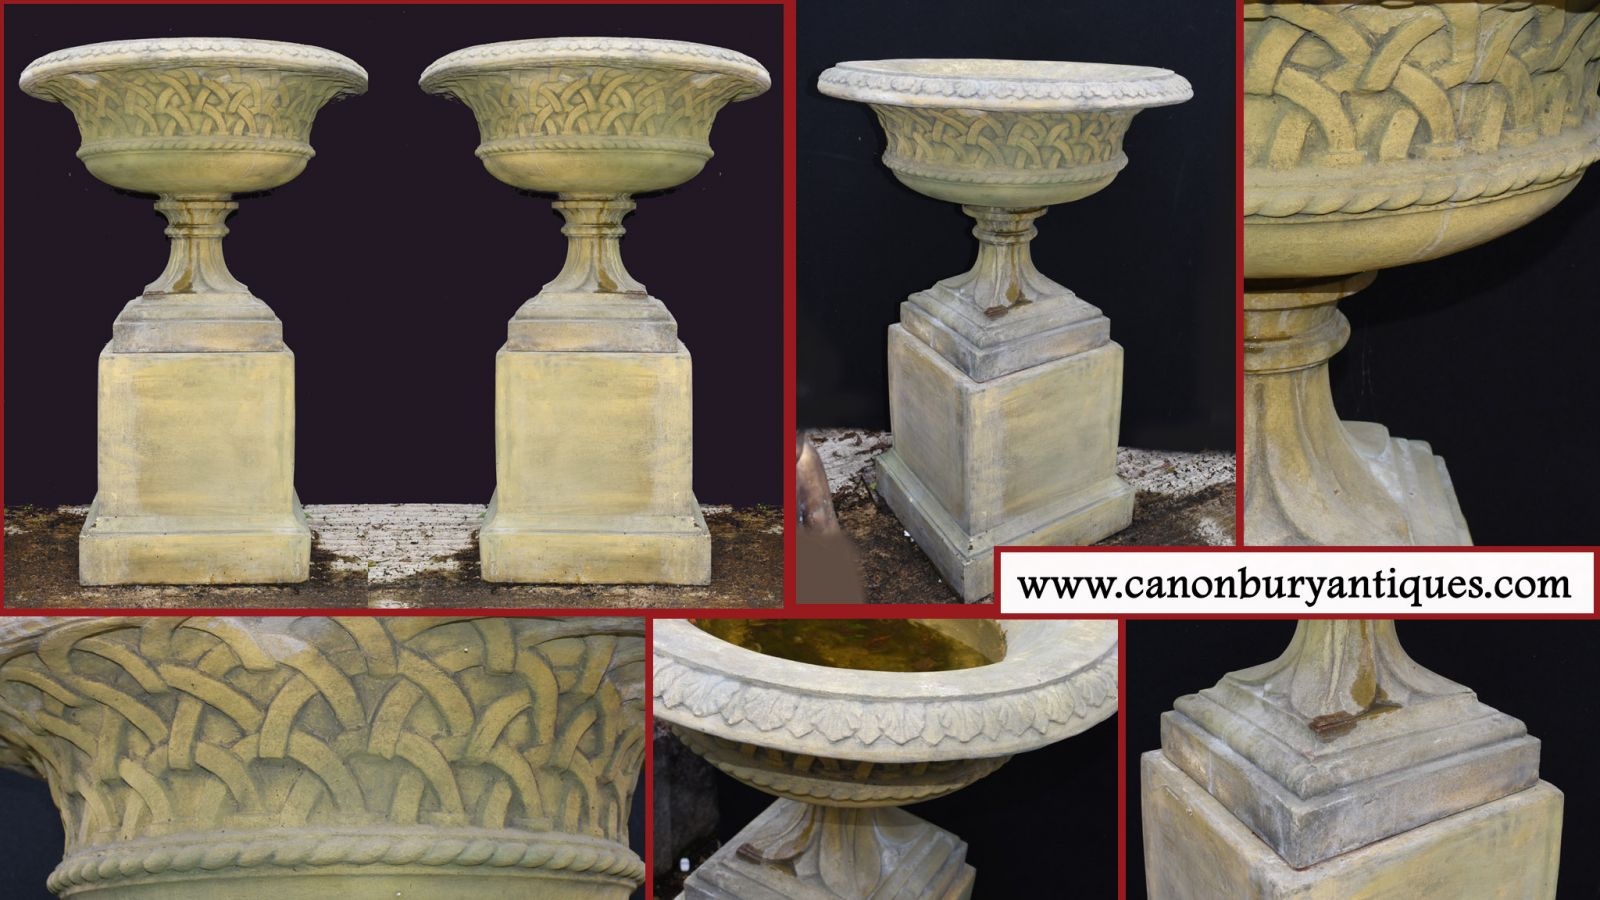 We also specialise in garden furniture and big things for outside - terracotta garden urns